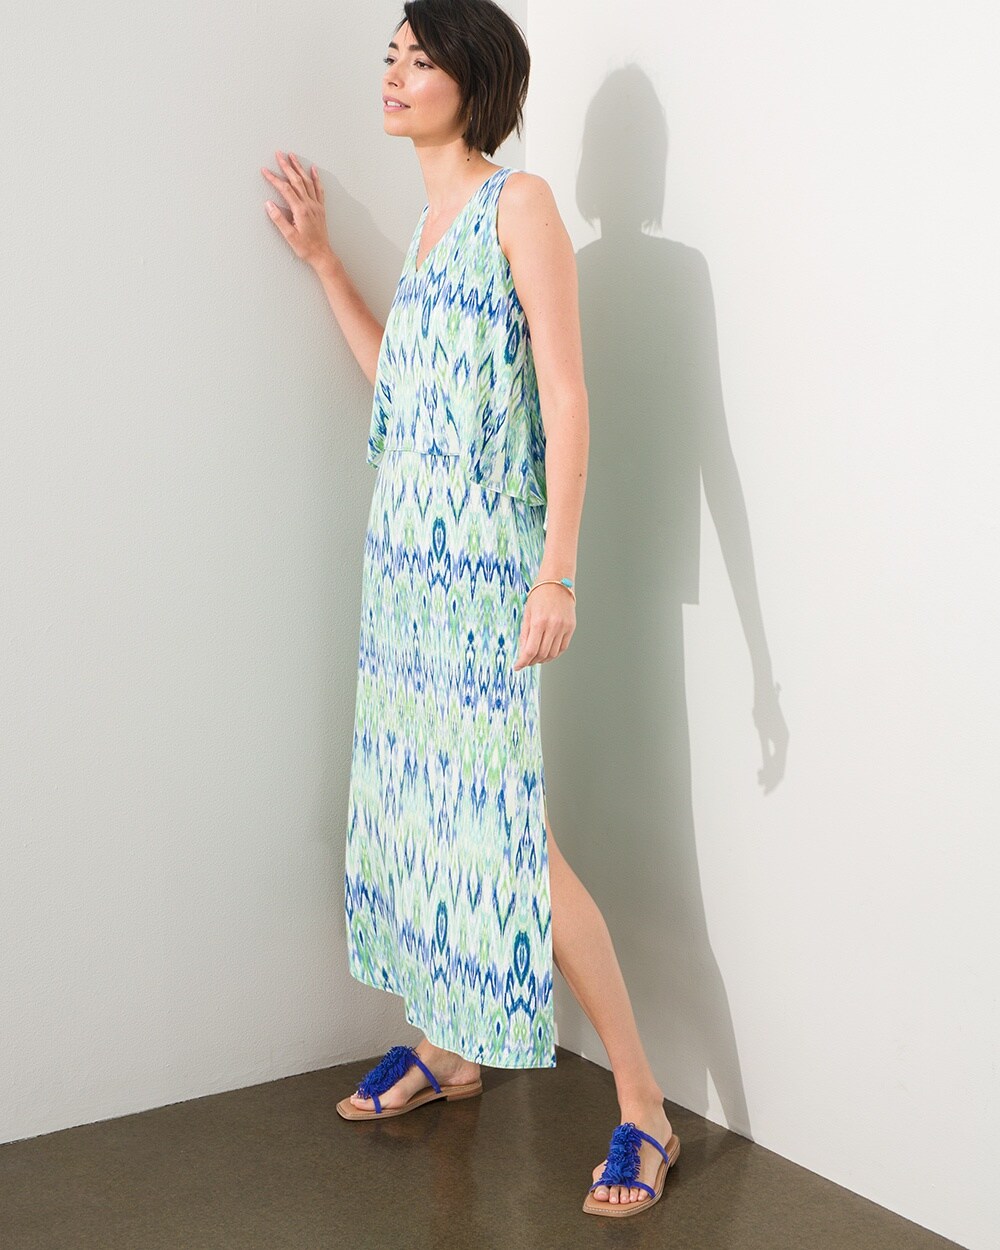 Ikat Print Popover Maxi Dress video preview image, click to start video